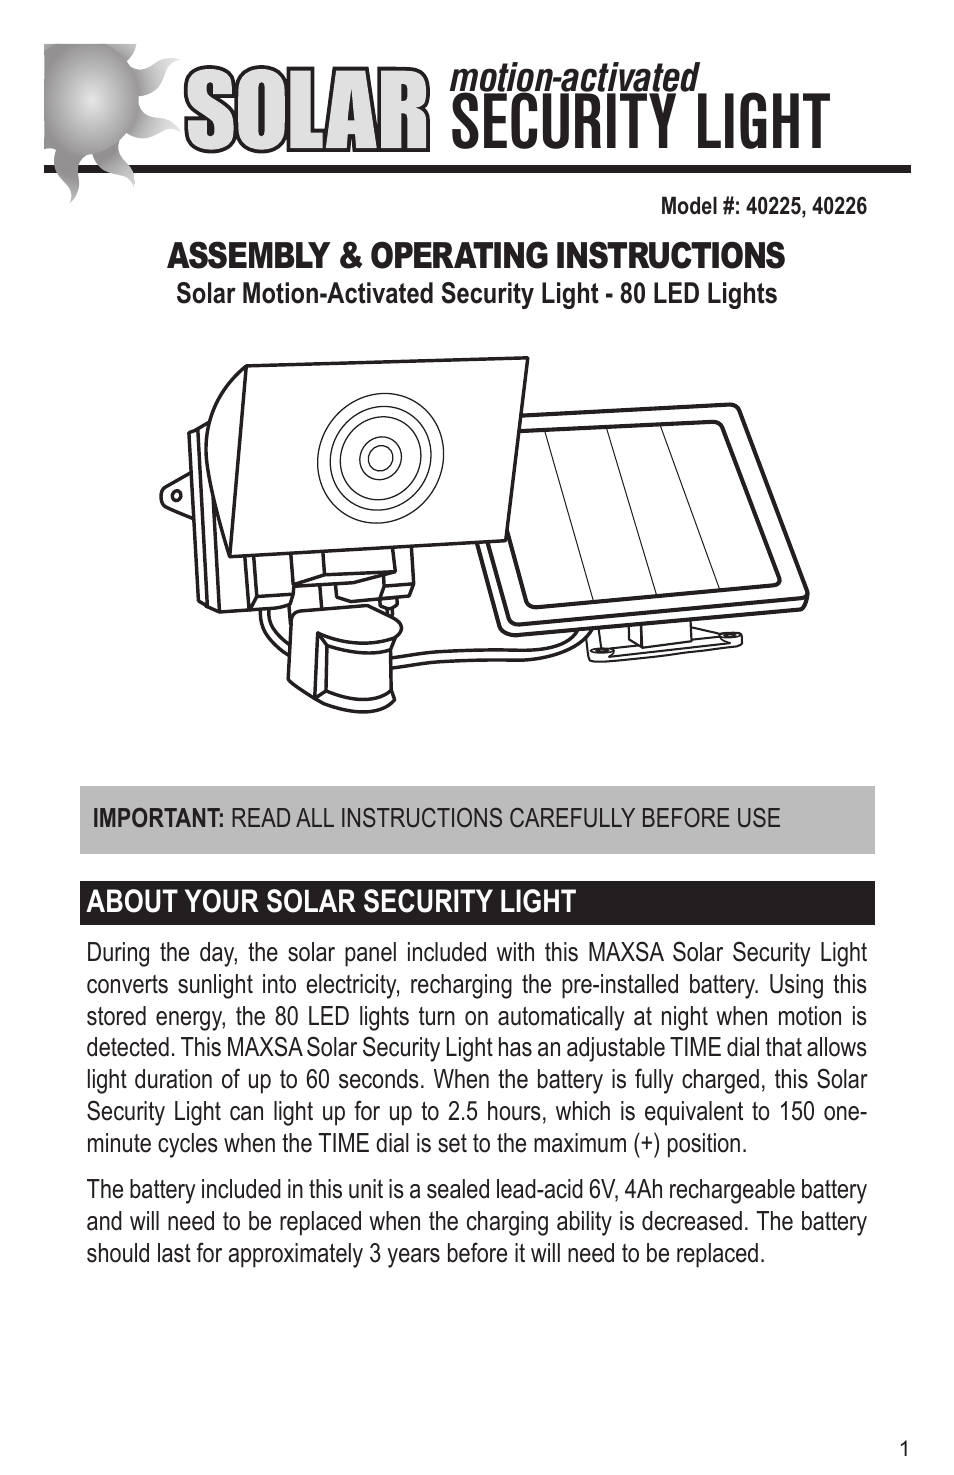 Solar-Powered 80 LED Motion-Activated Outdoor Security Floodlight